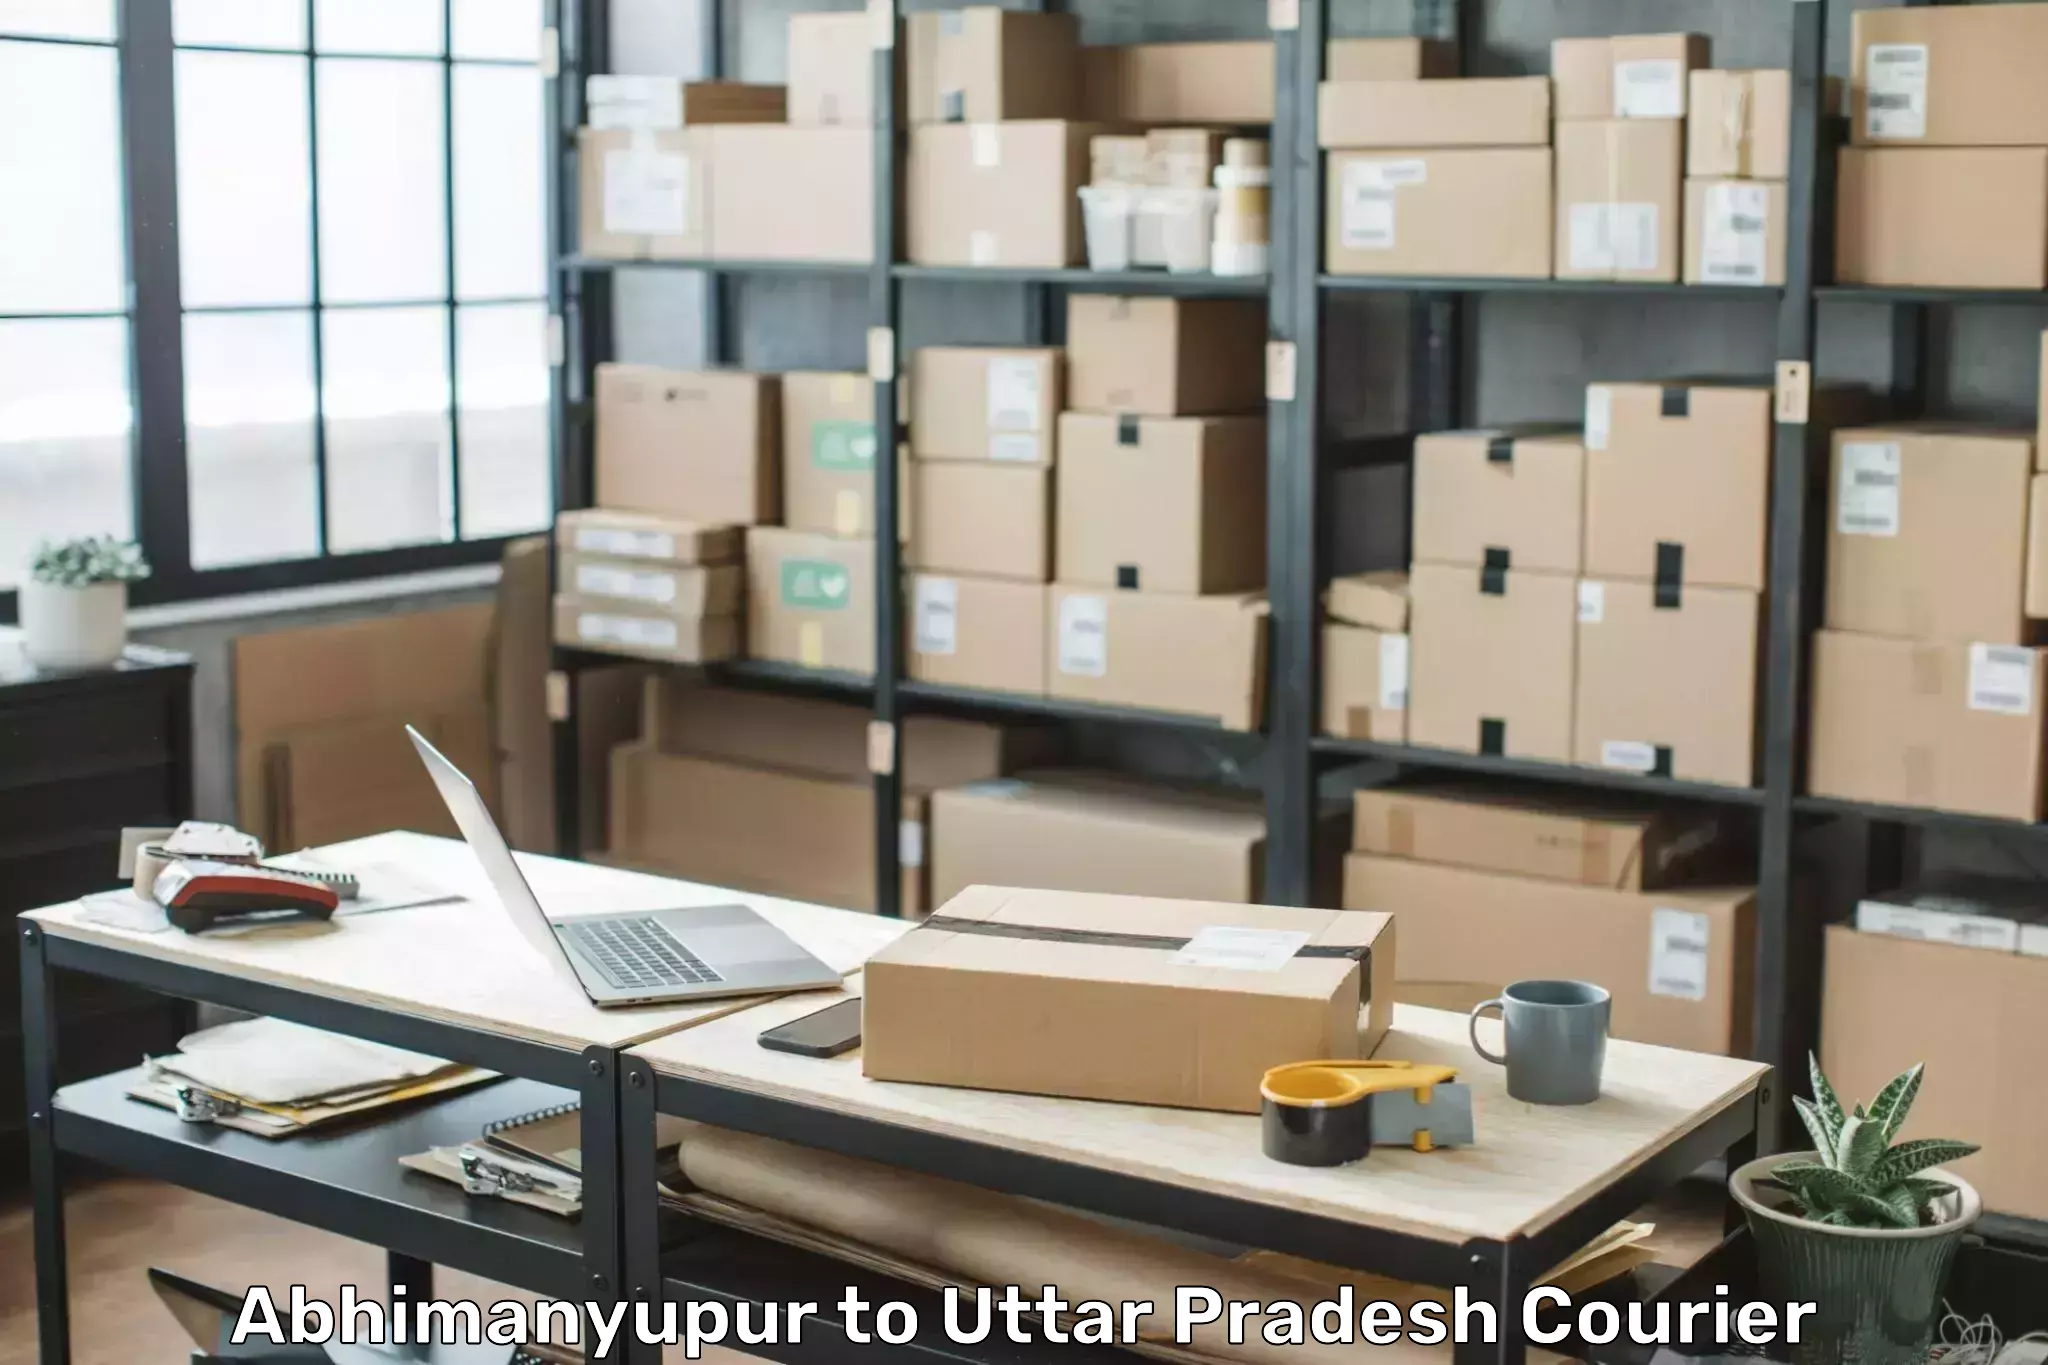 Baggage shipping service Abhimanyupur to Chitrakoot